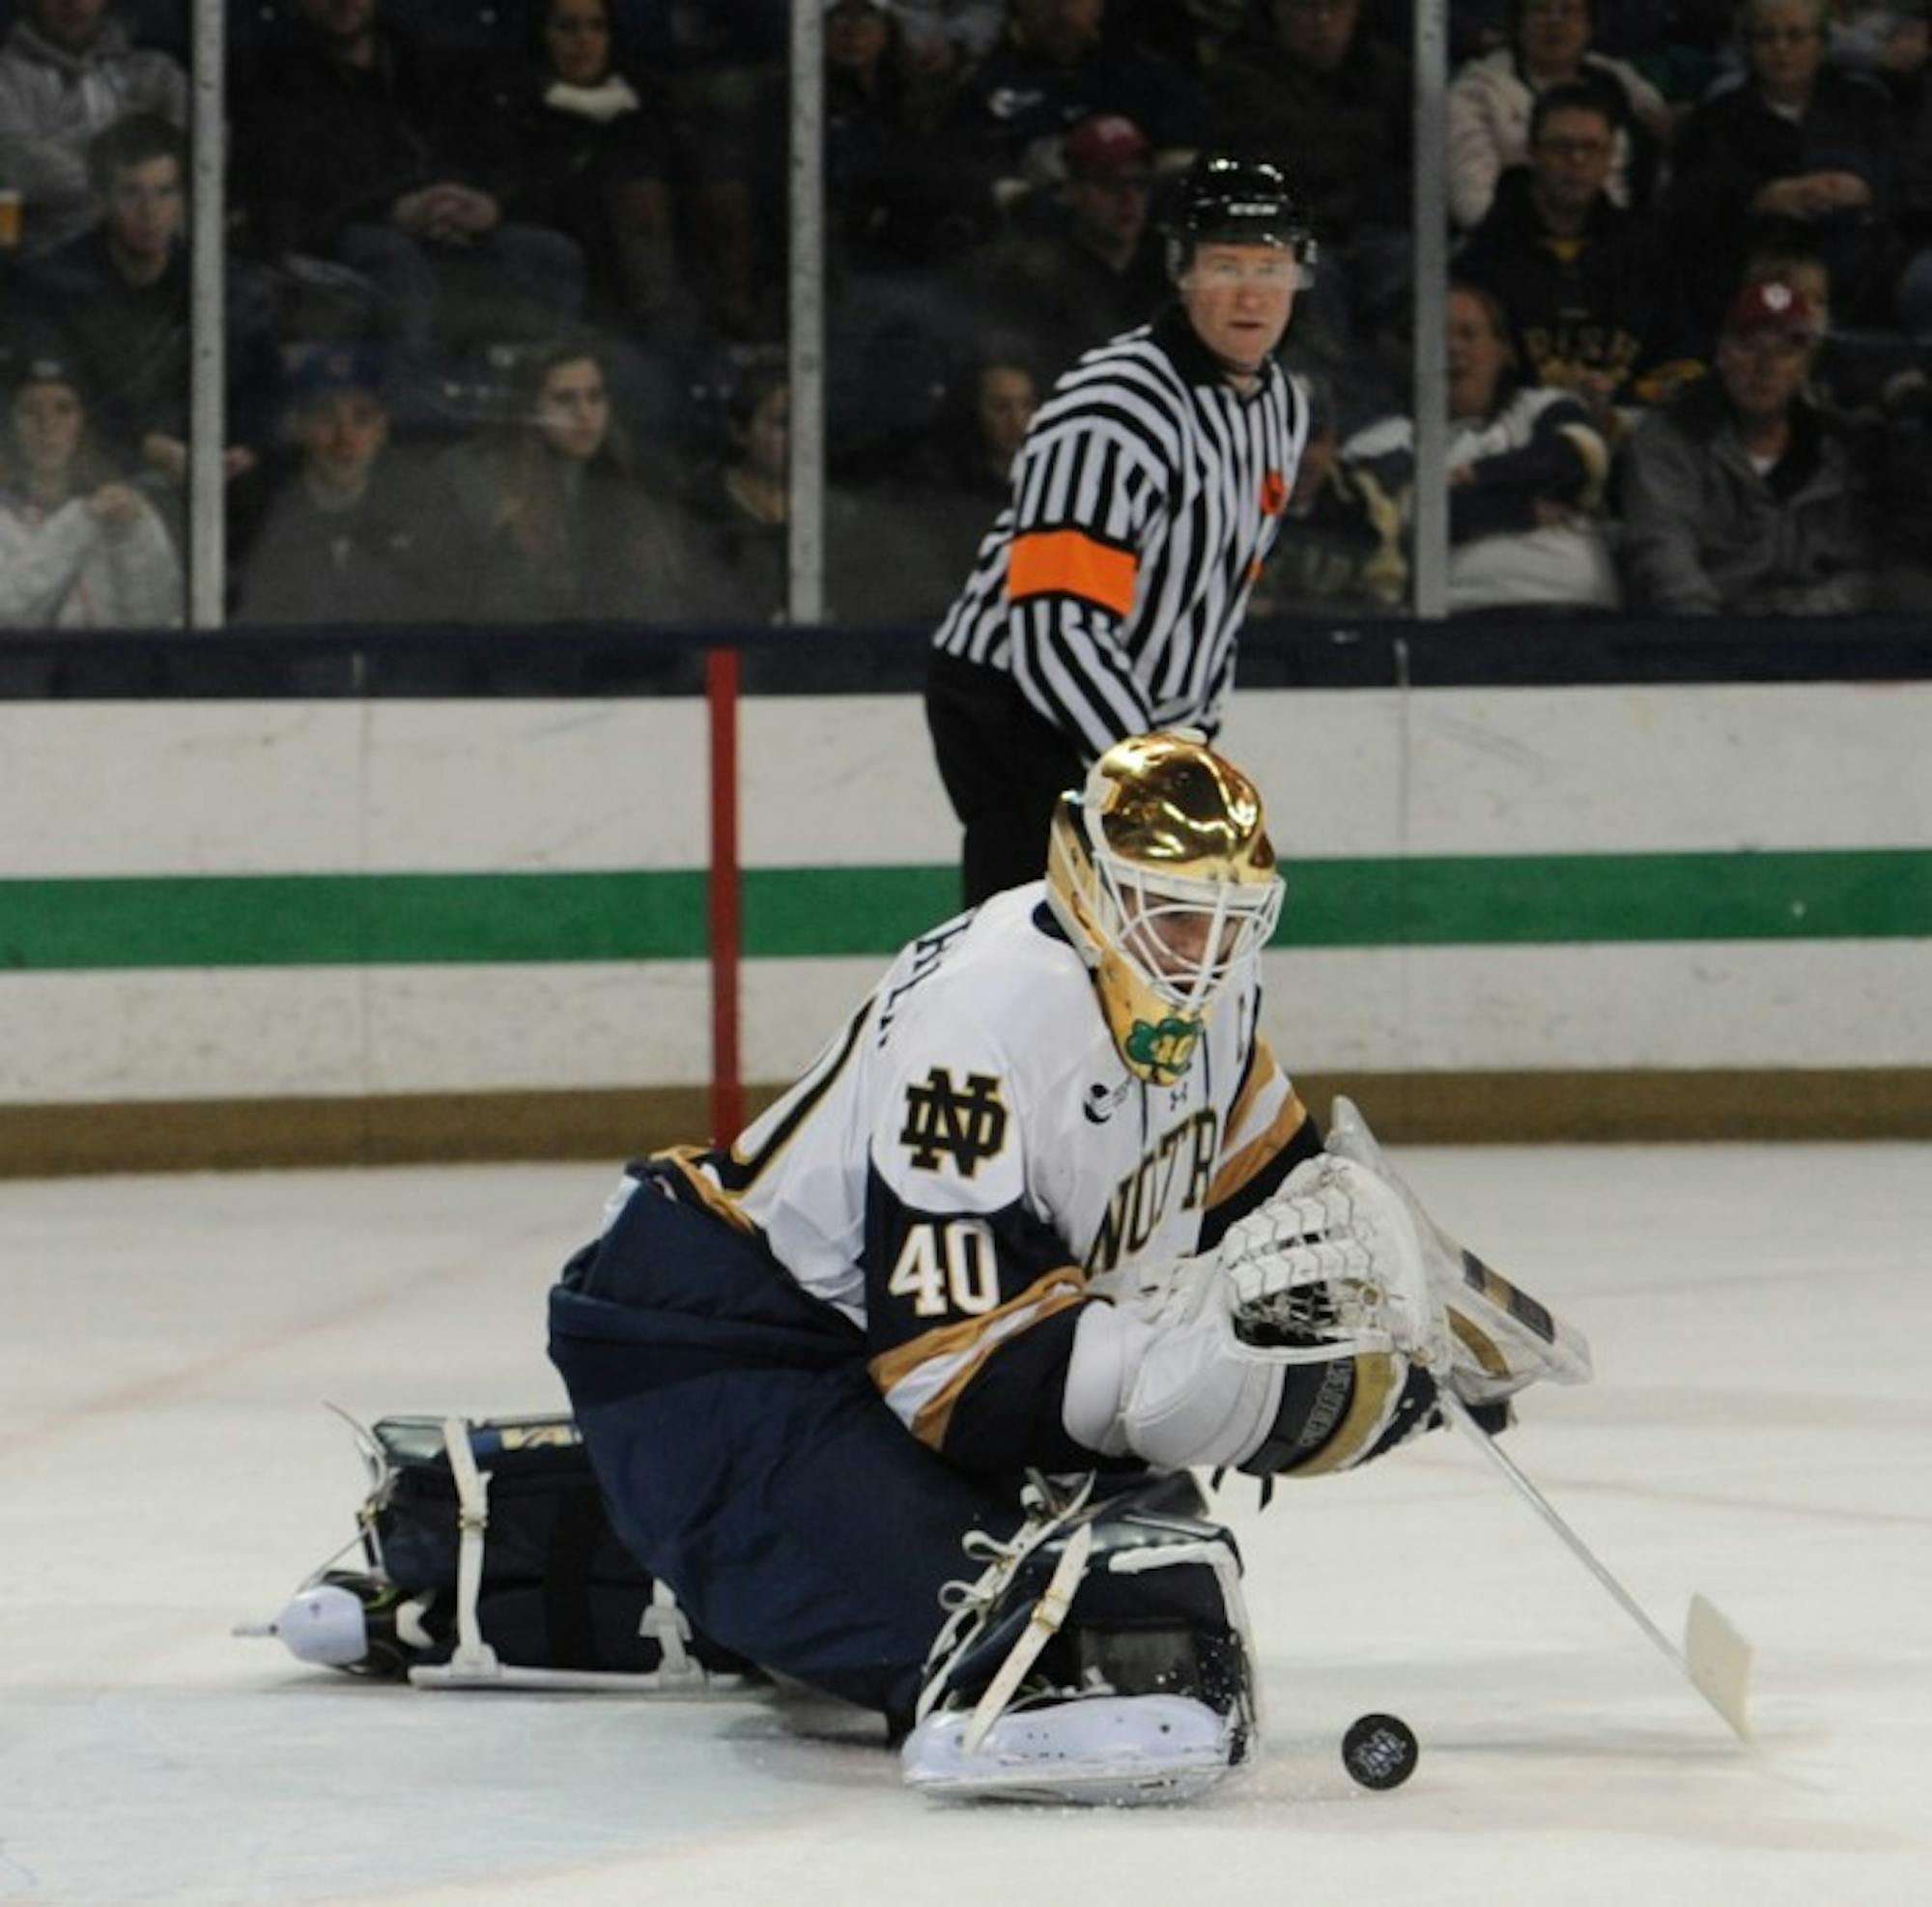 Irish junior goalie Cal Peterson stretches out to make a save during Notre Dame's 2-2 tie with New Hampshire on Jan. 20.